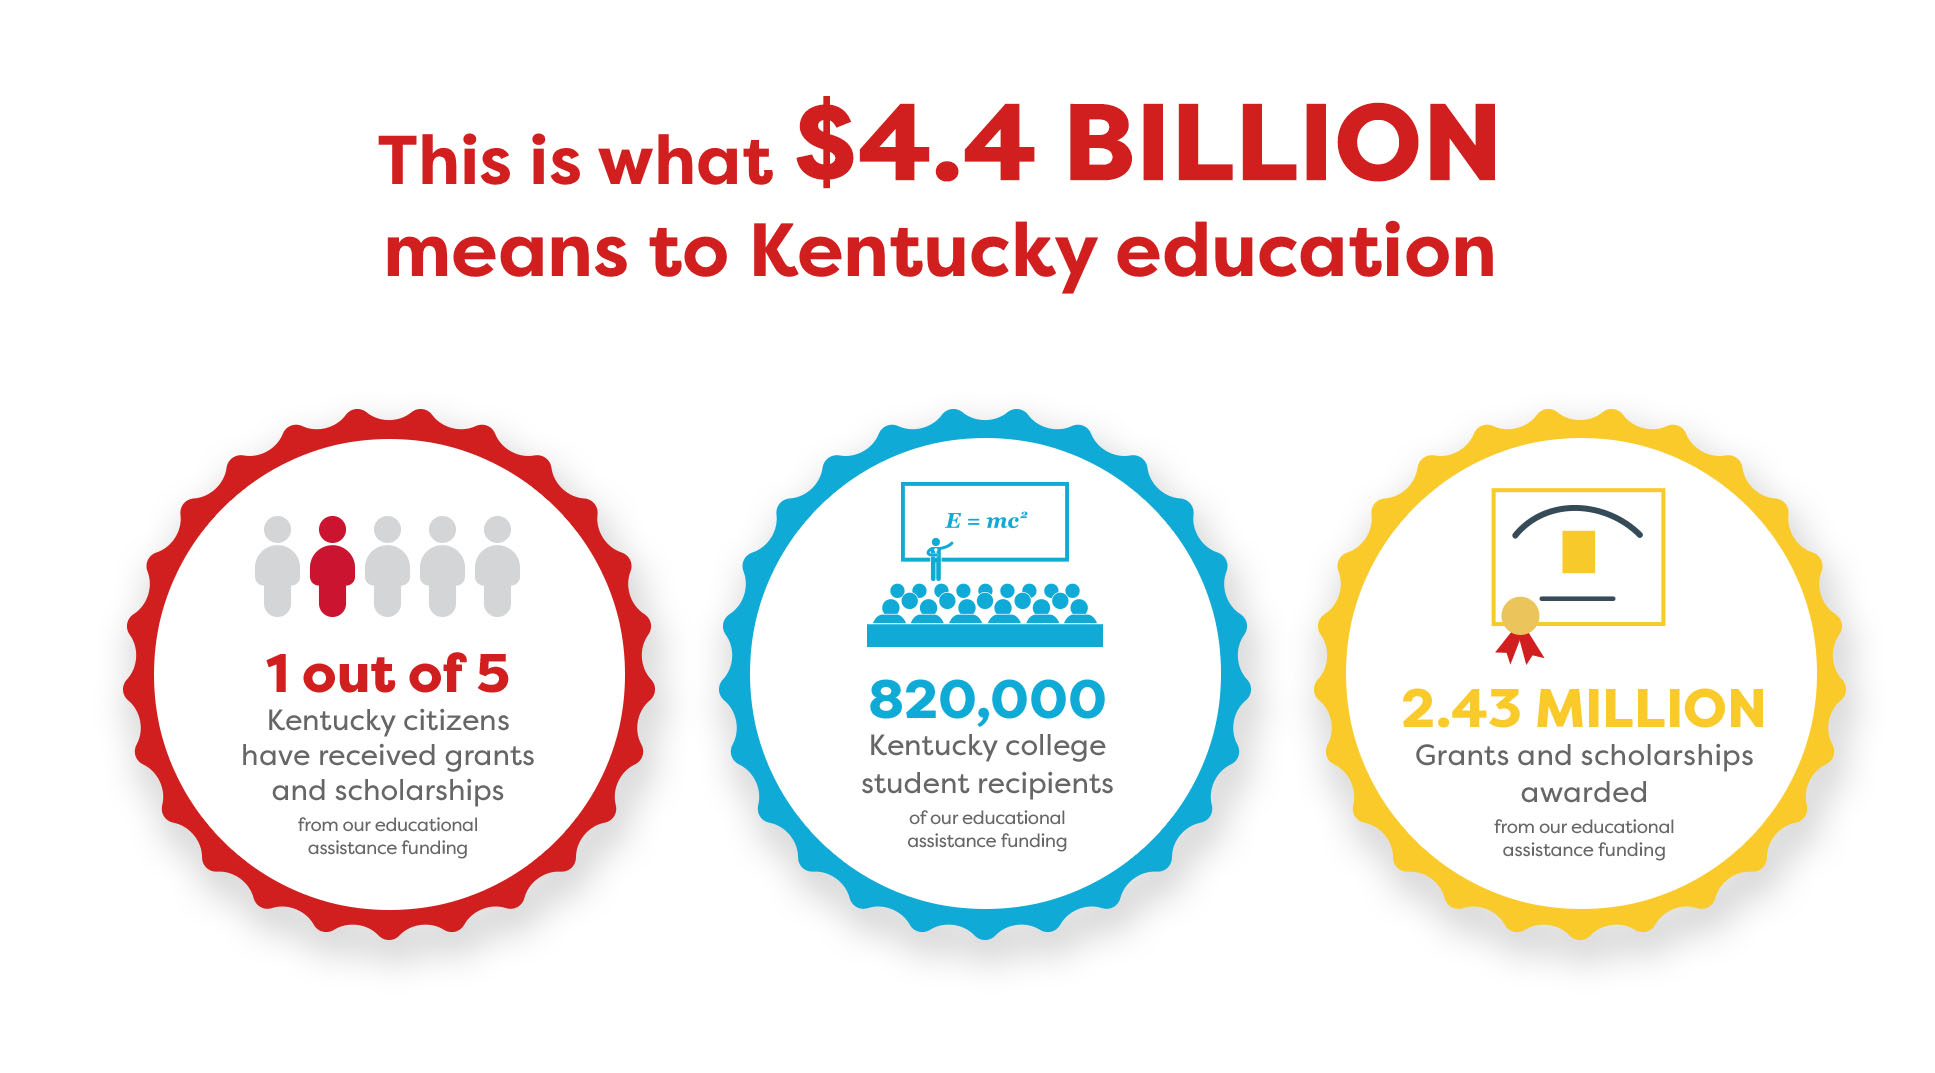 This is what $4.4 Billion means 1 out of 5 KY citizens received grants and scholarships, 860,000 KY college recipients, 2.59 Million grants and scholarships awarded